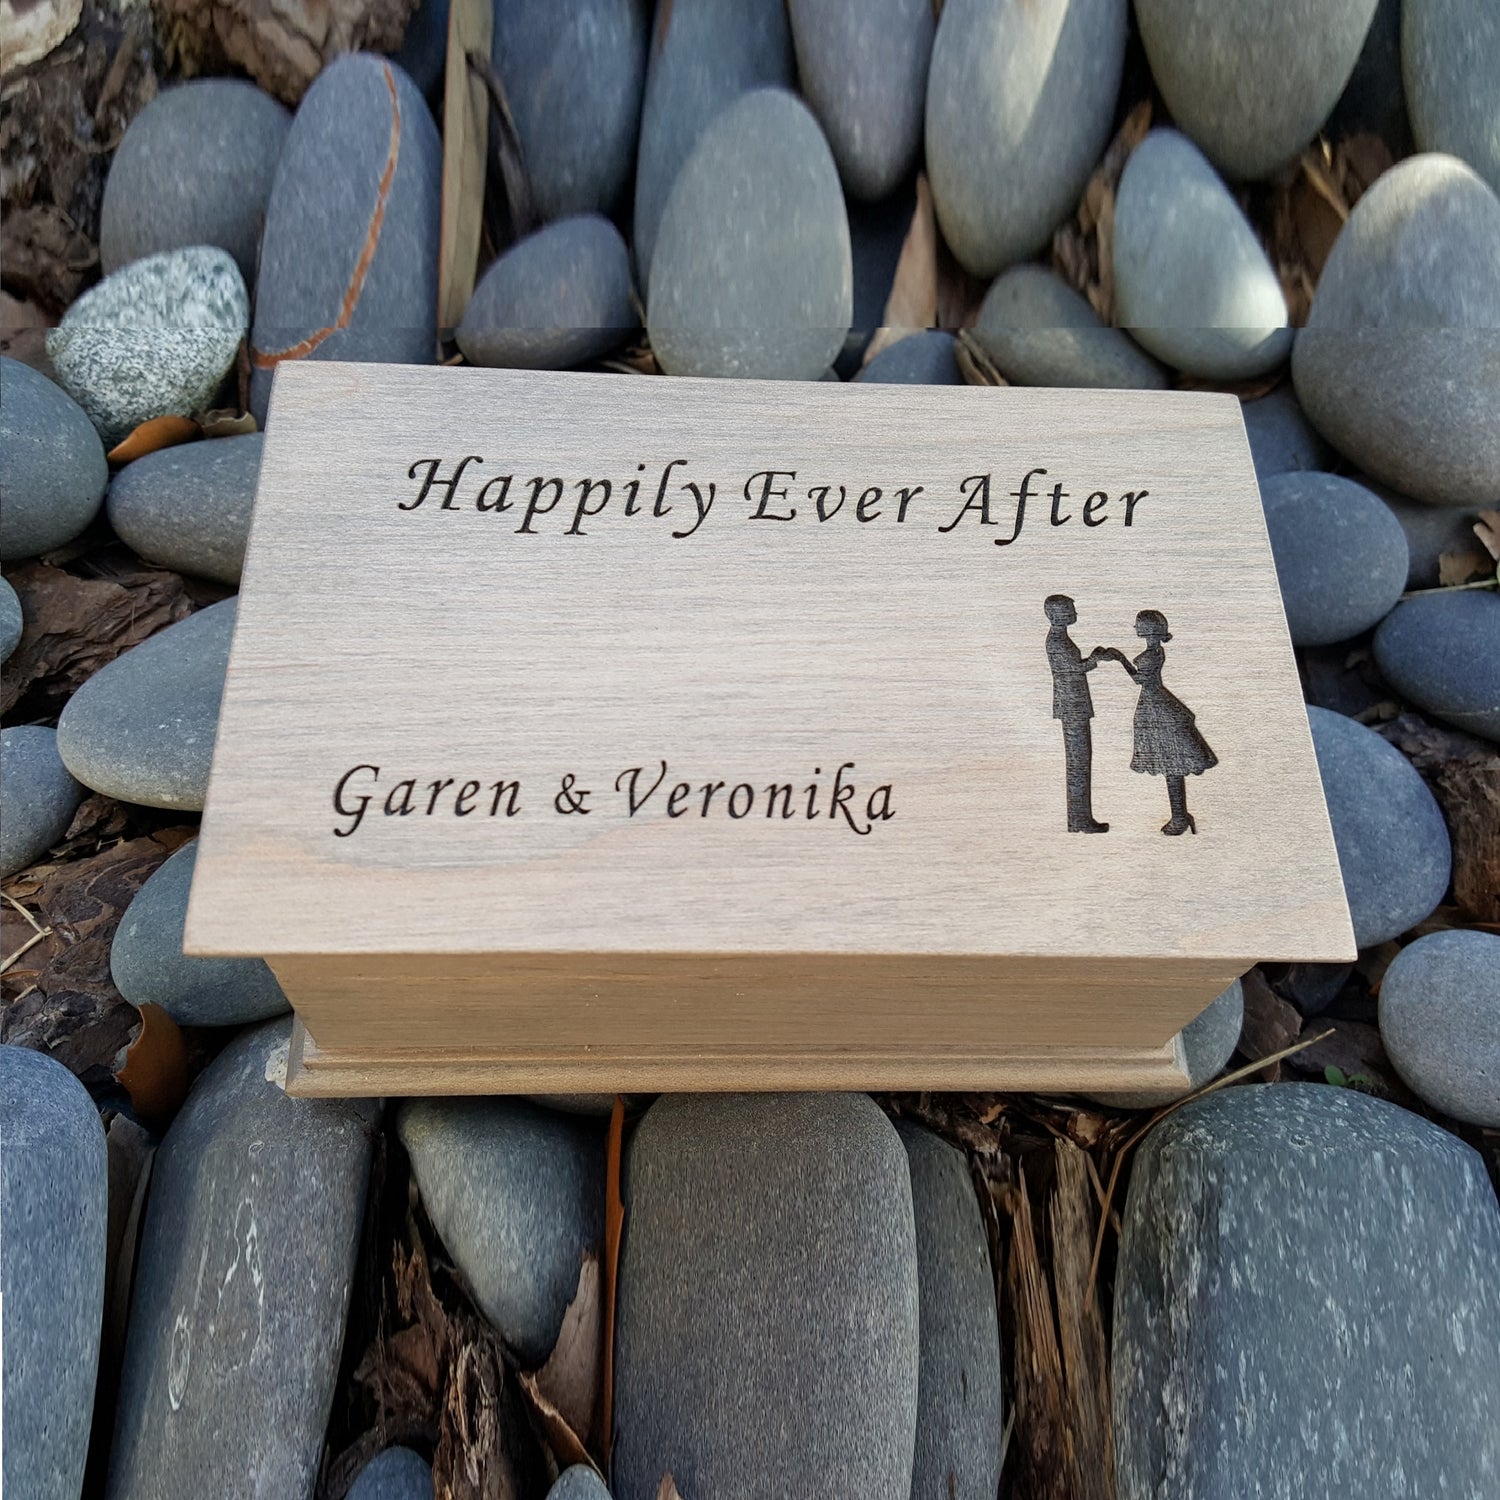 Happily Ever After engraved jewelry box with couple and your names engraved on top